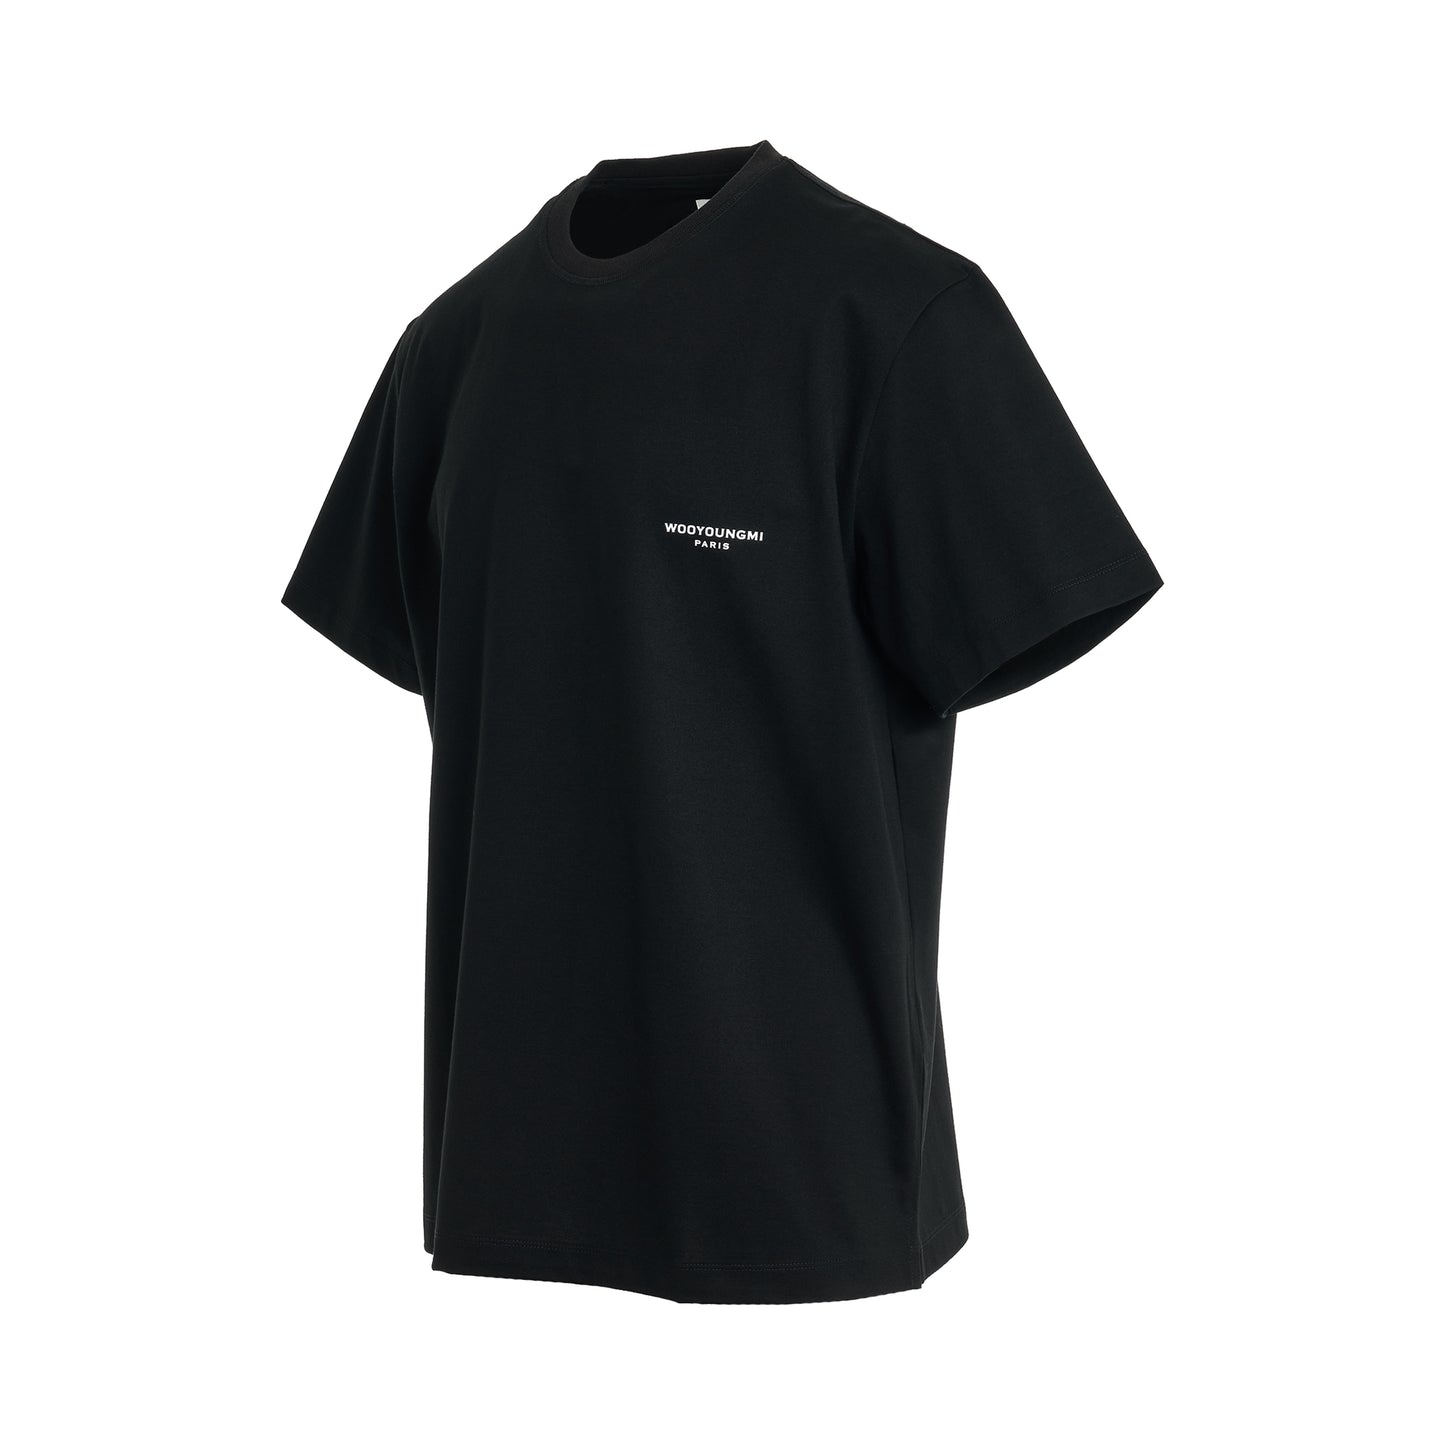 Square Patch Logo T-Shirt in Black